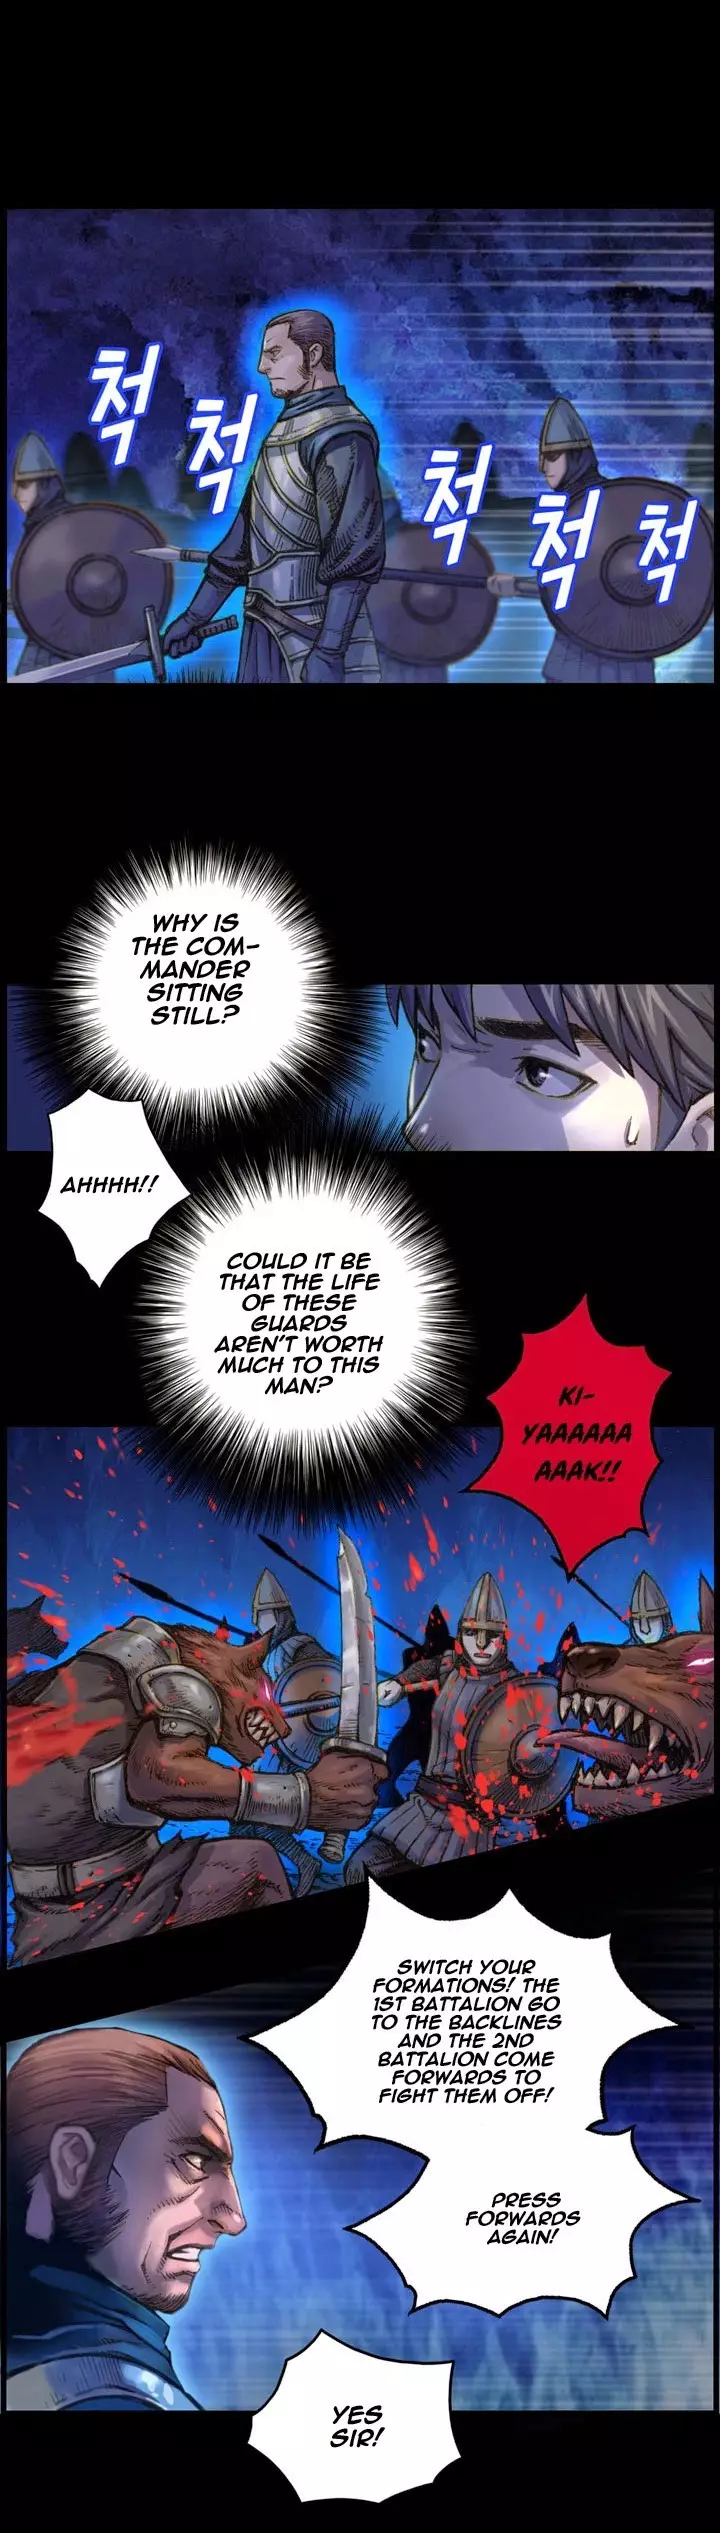 The Legendary Moonlight Sculptor - 17 page p_00009